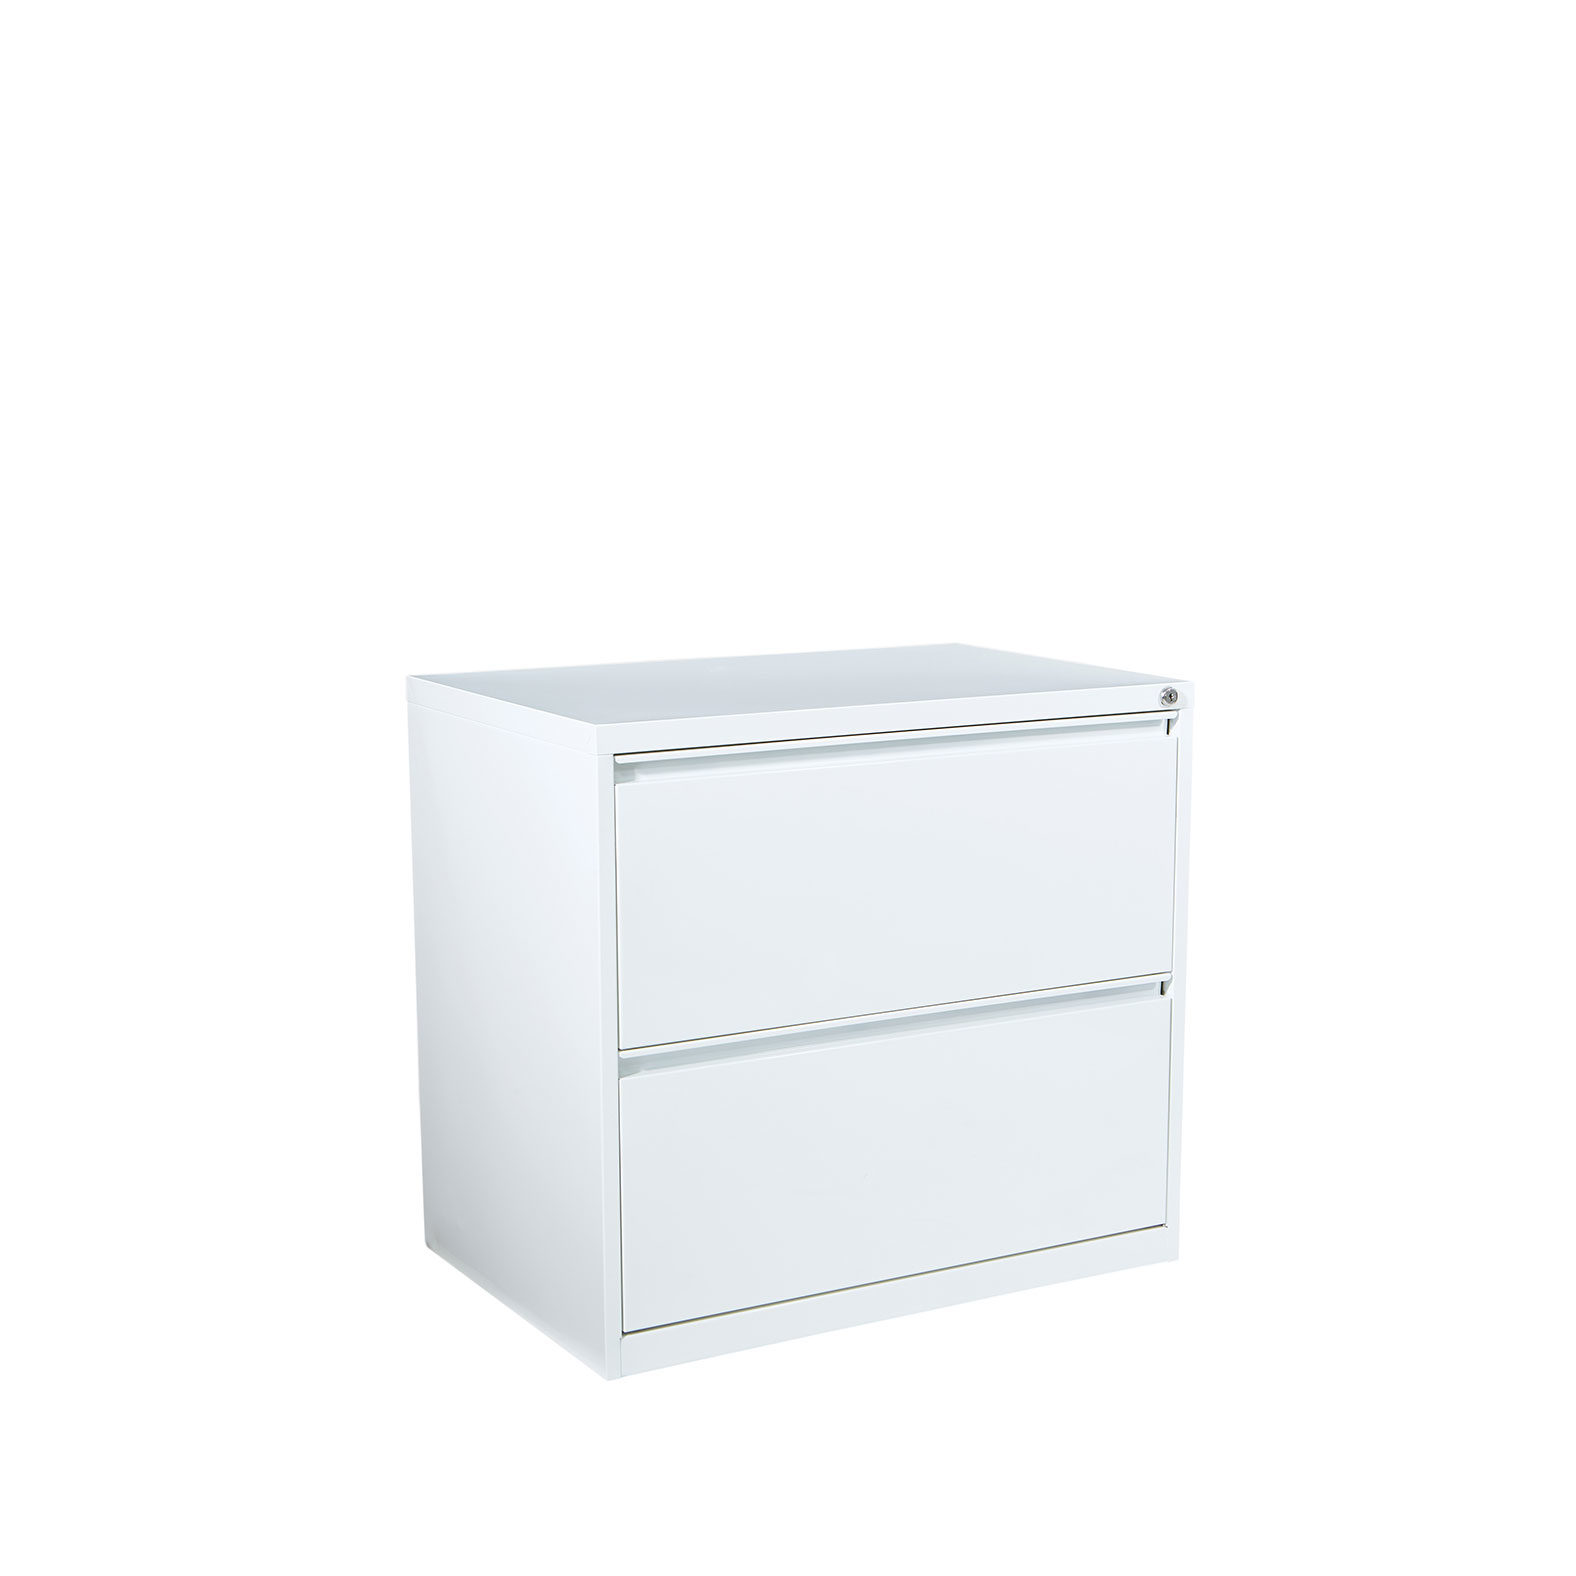 2 drawer white lateral file